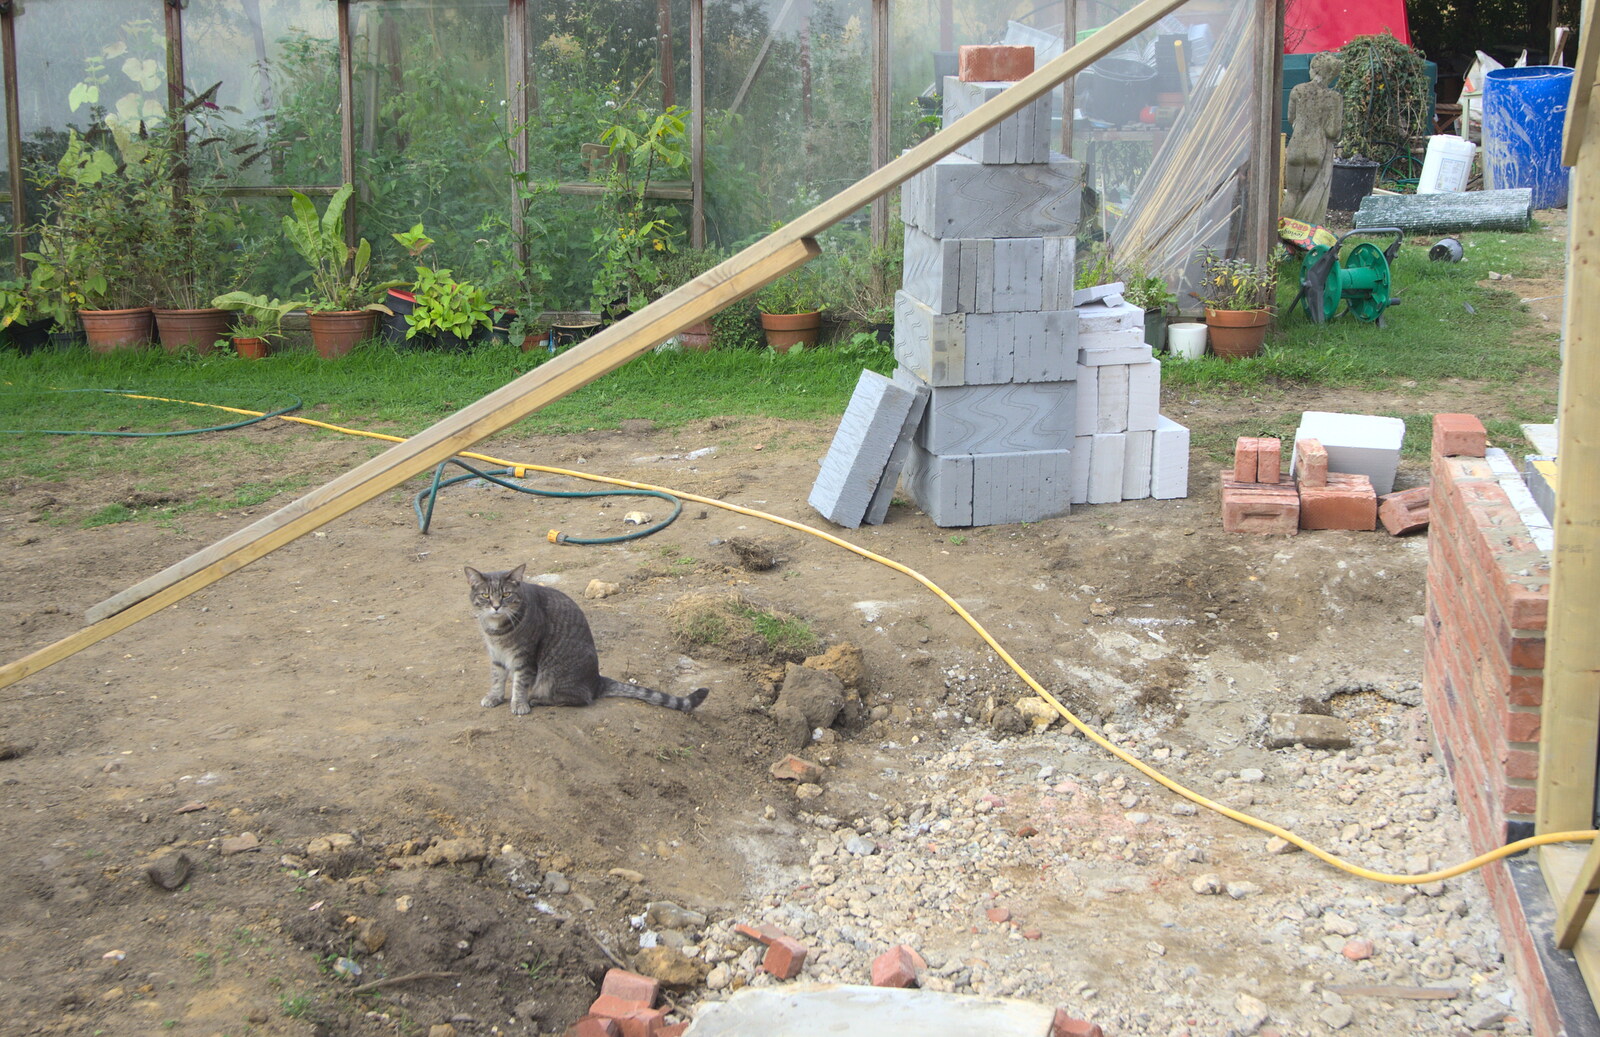 Boris sits around and watches from Bressingham Gardens, and Building Progress, Brome, Suffolk - 26th August 2013